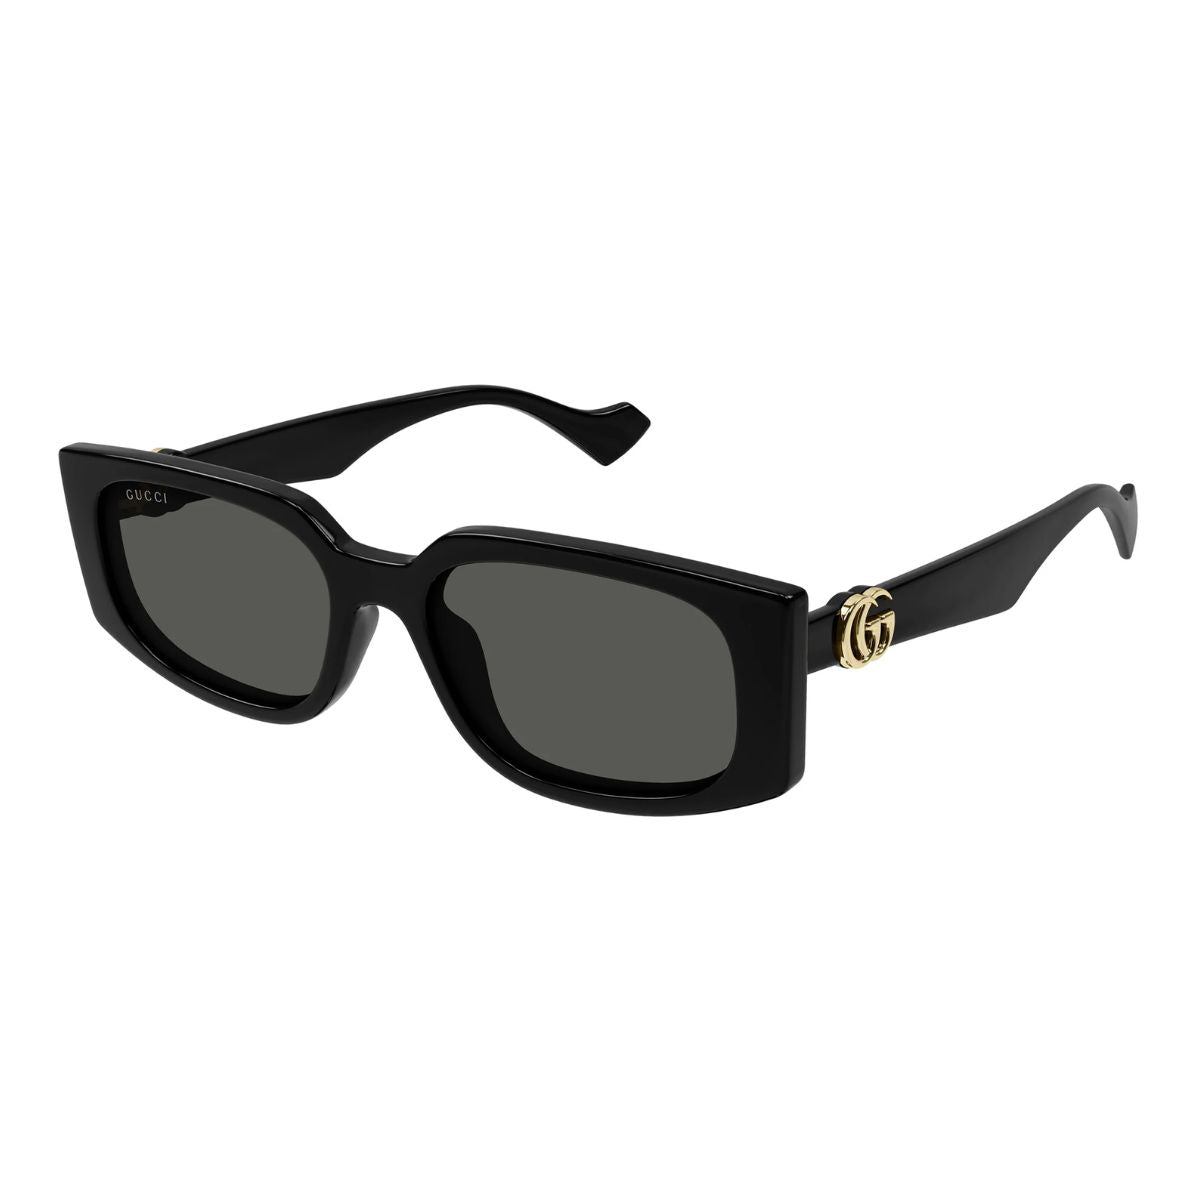 "Gucci Sunglasses and frames - Find Your Style at Optorium"